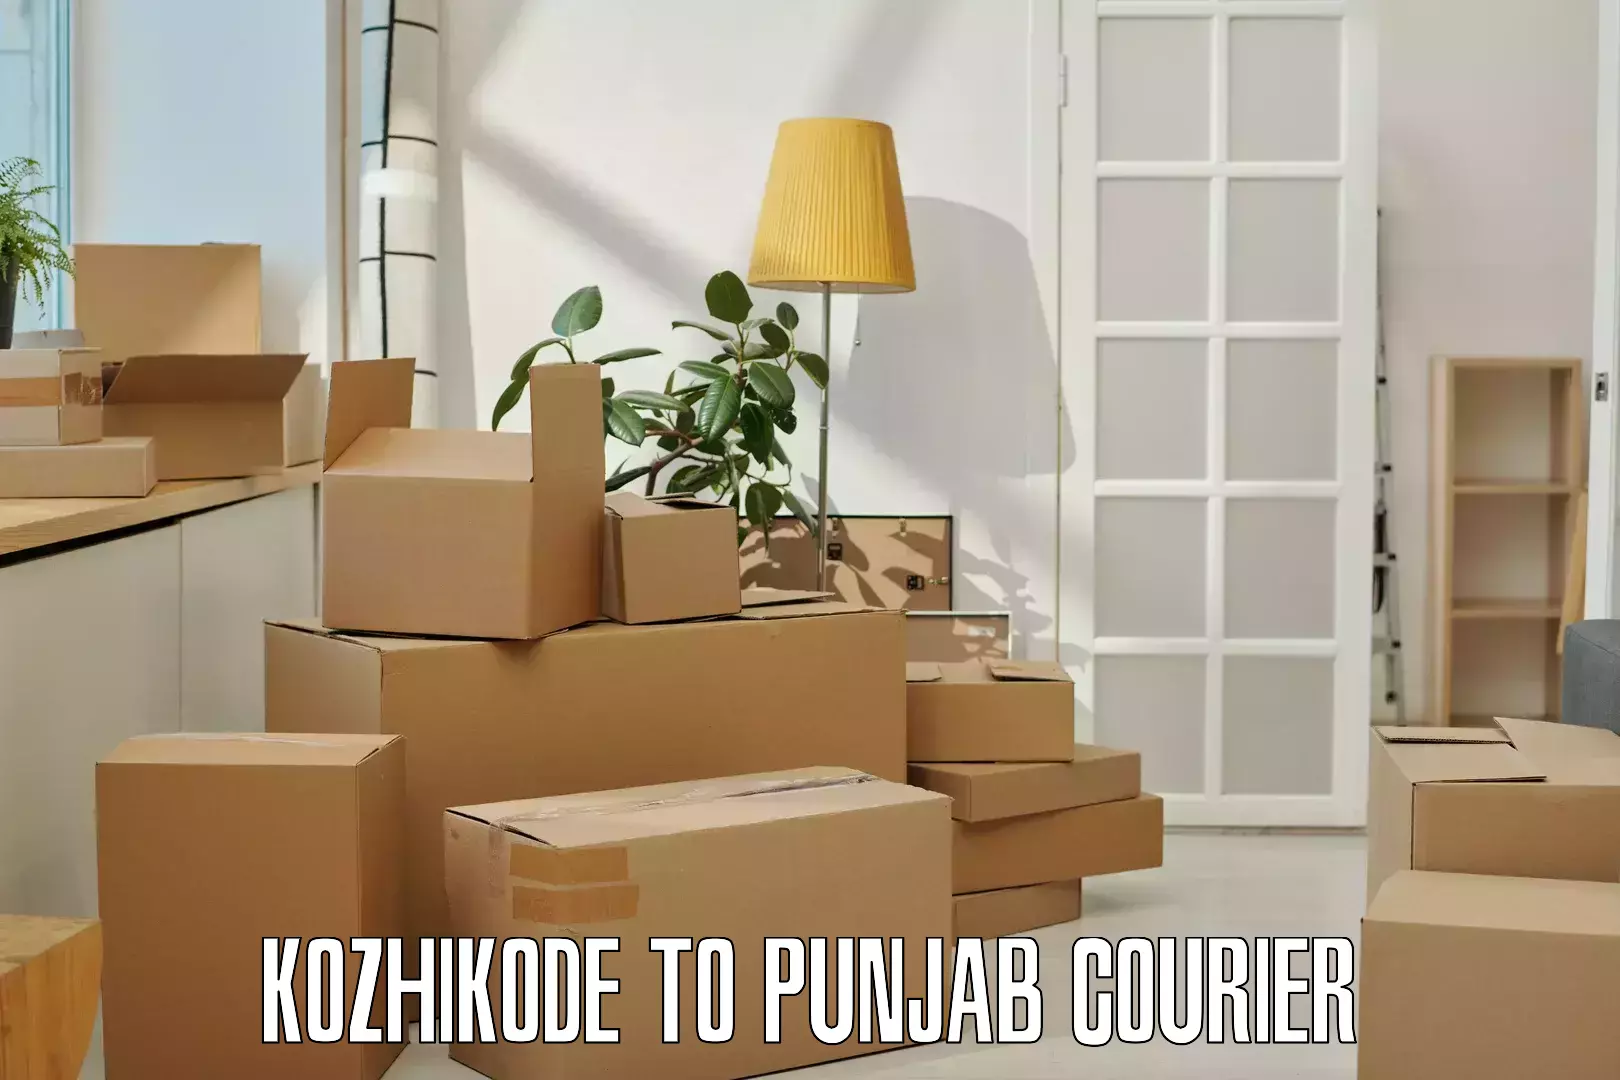 Full-service courier options in Kozhikode to Rajpura